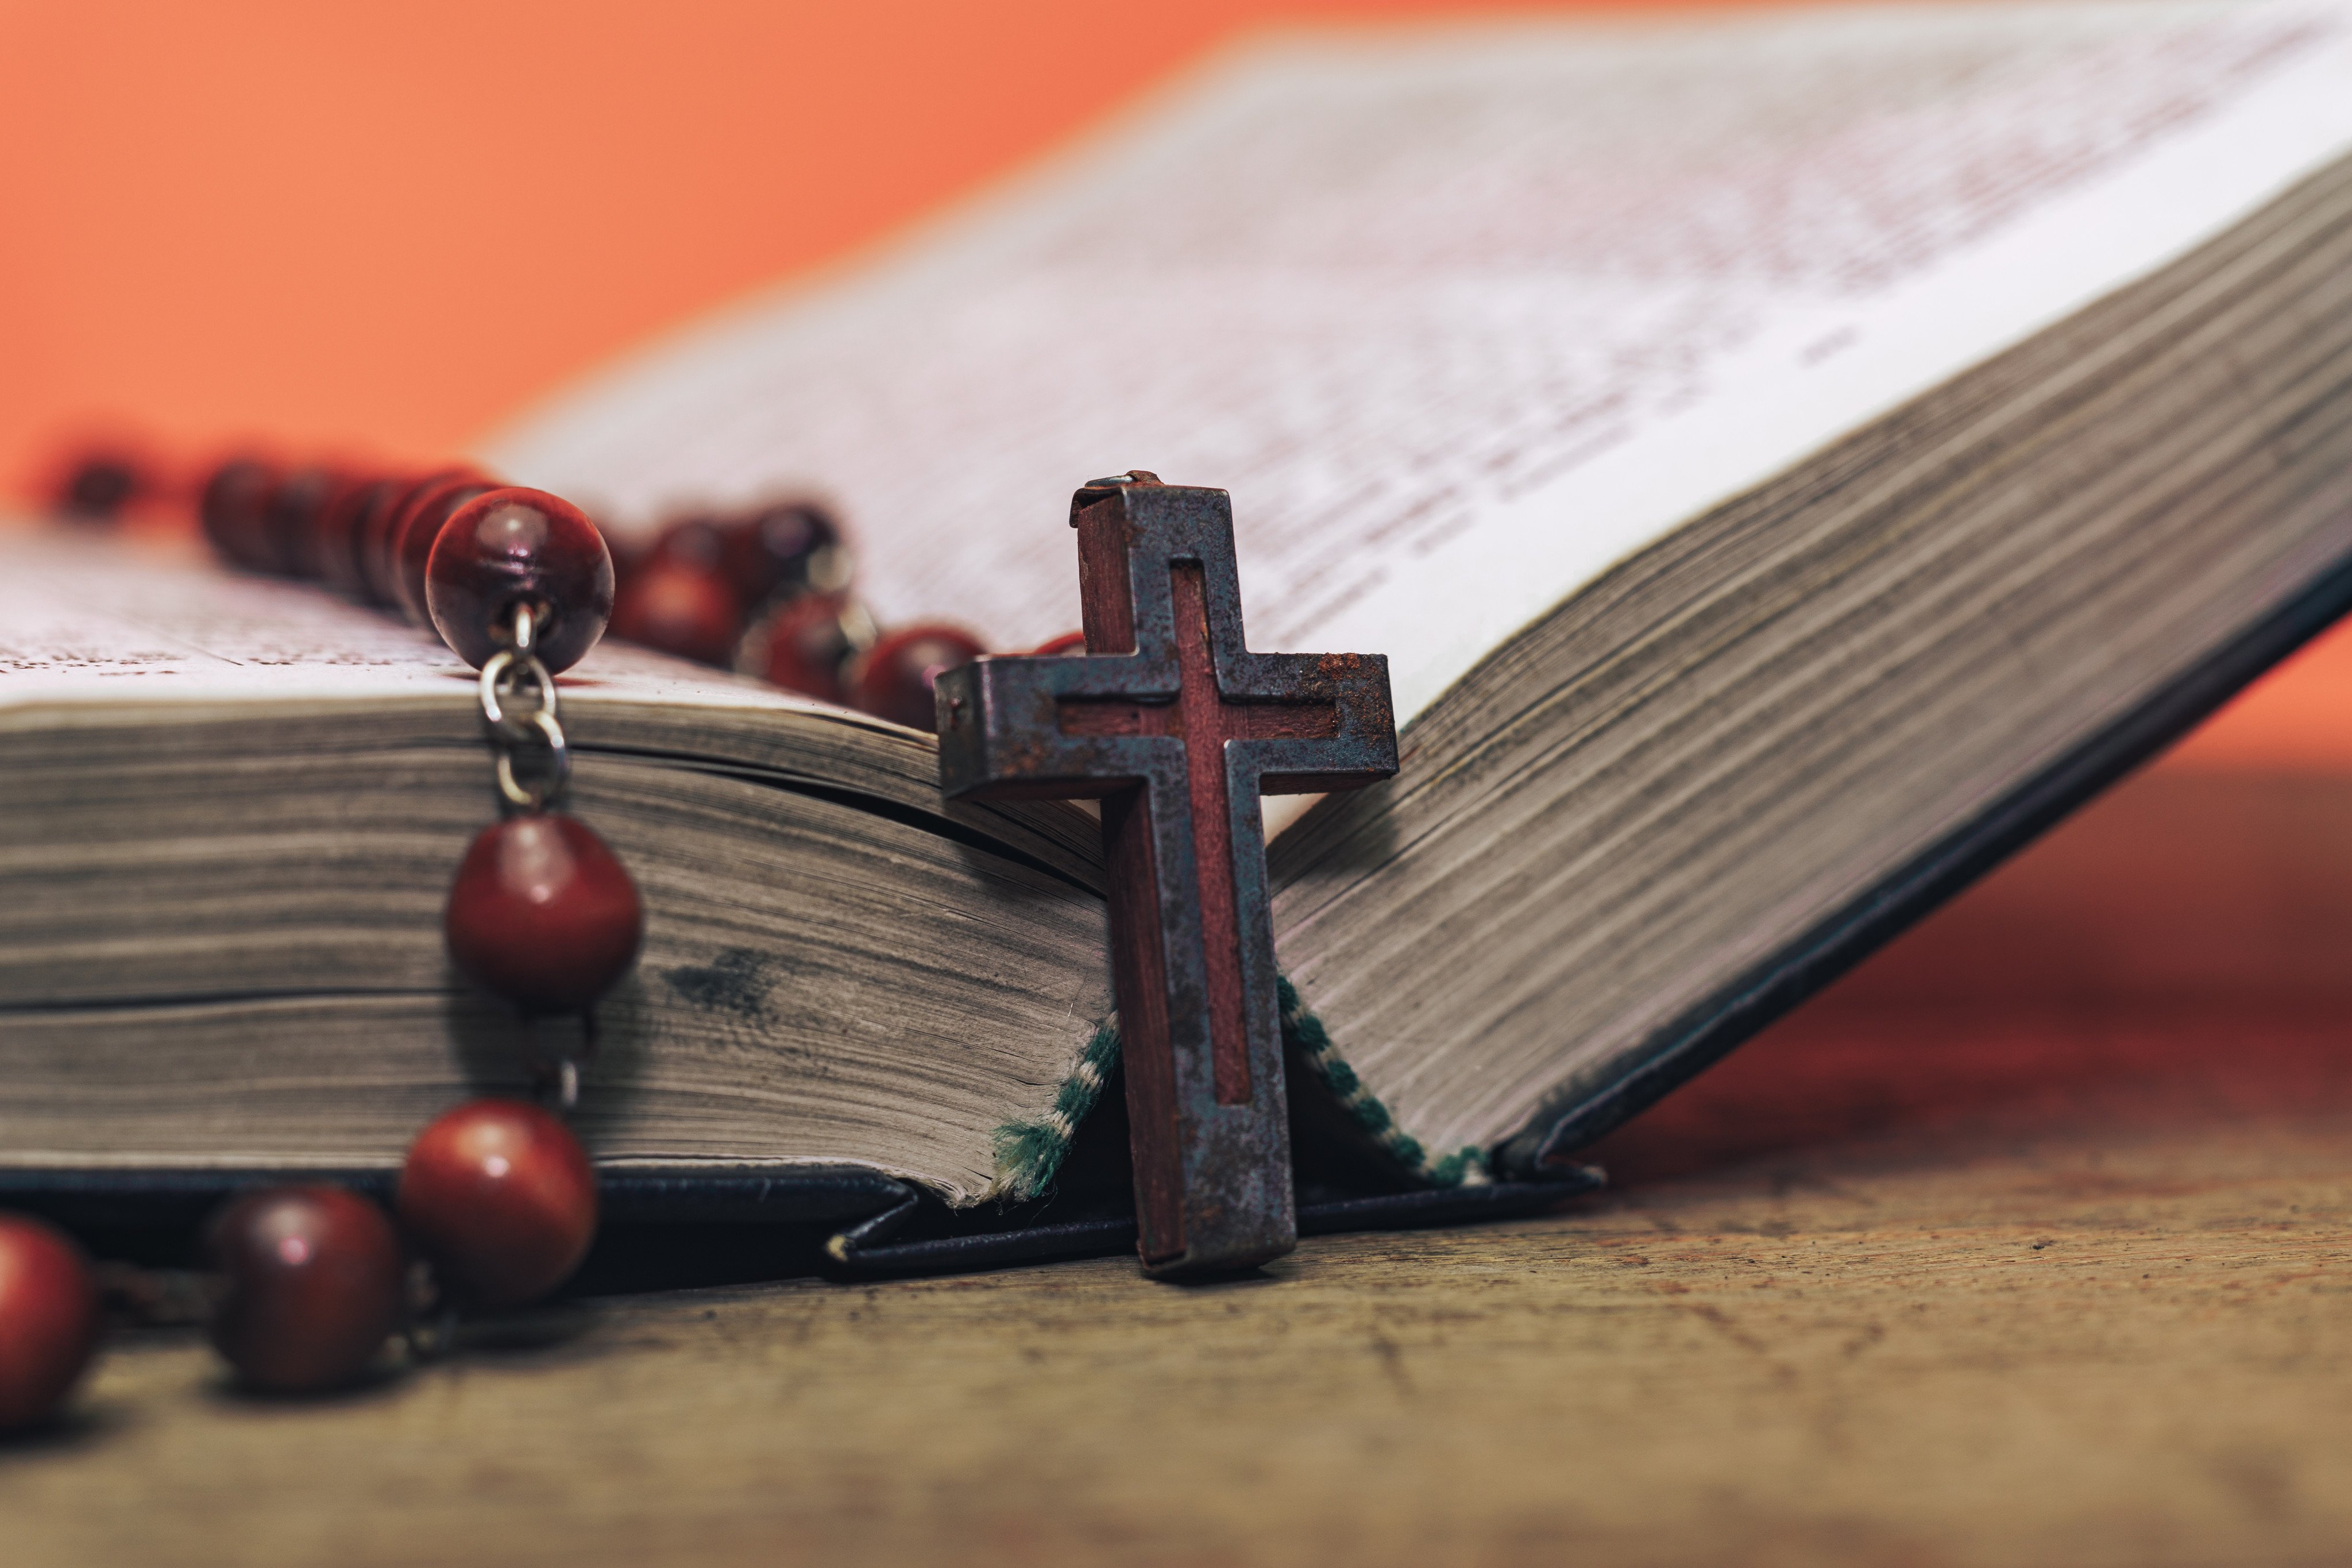 A Polish priest was sentenced to 18 months in jail for sex and drug crimes, after an incident in which a man reportedly collapsed during an orgy at his home. Photo: Shutterstock